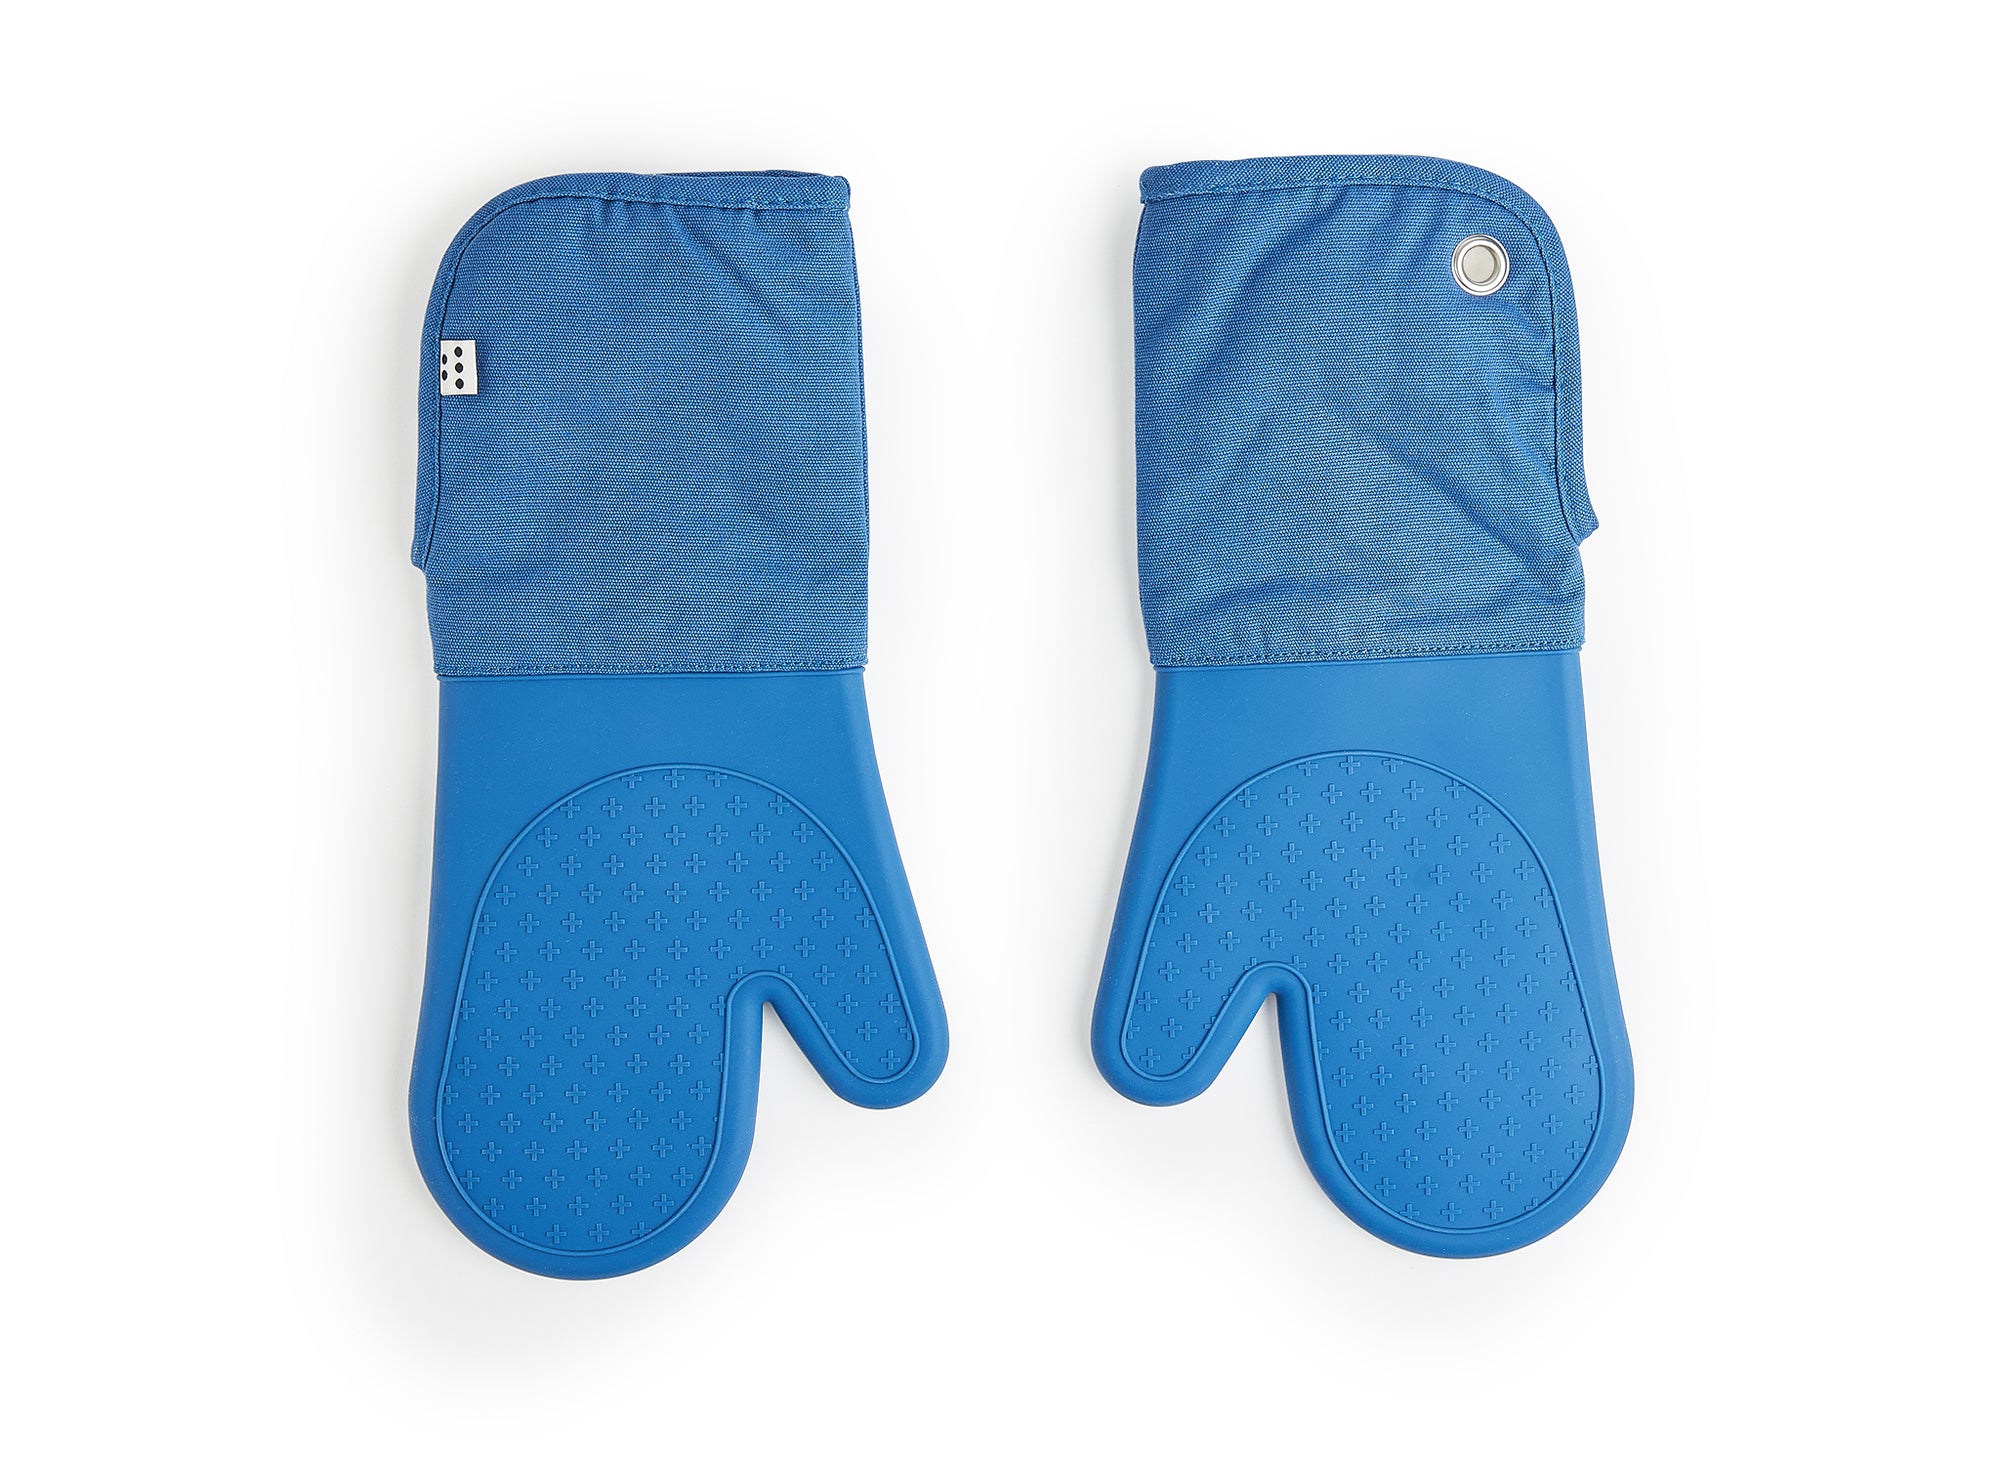 High-Quality Oven Mitts for Your Kitchen